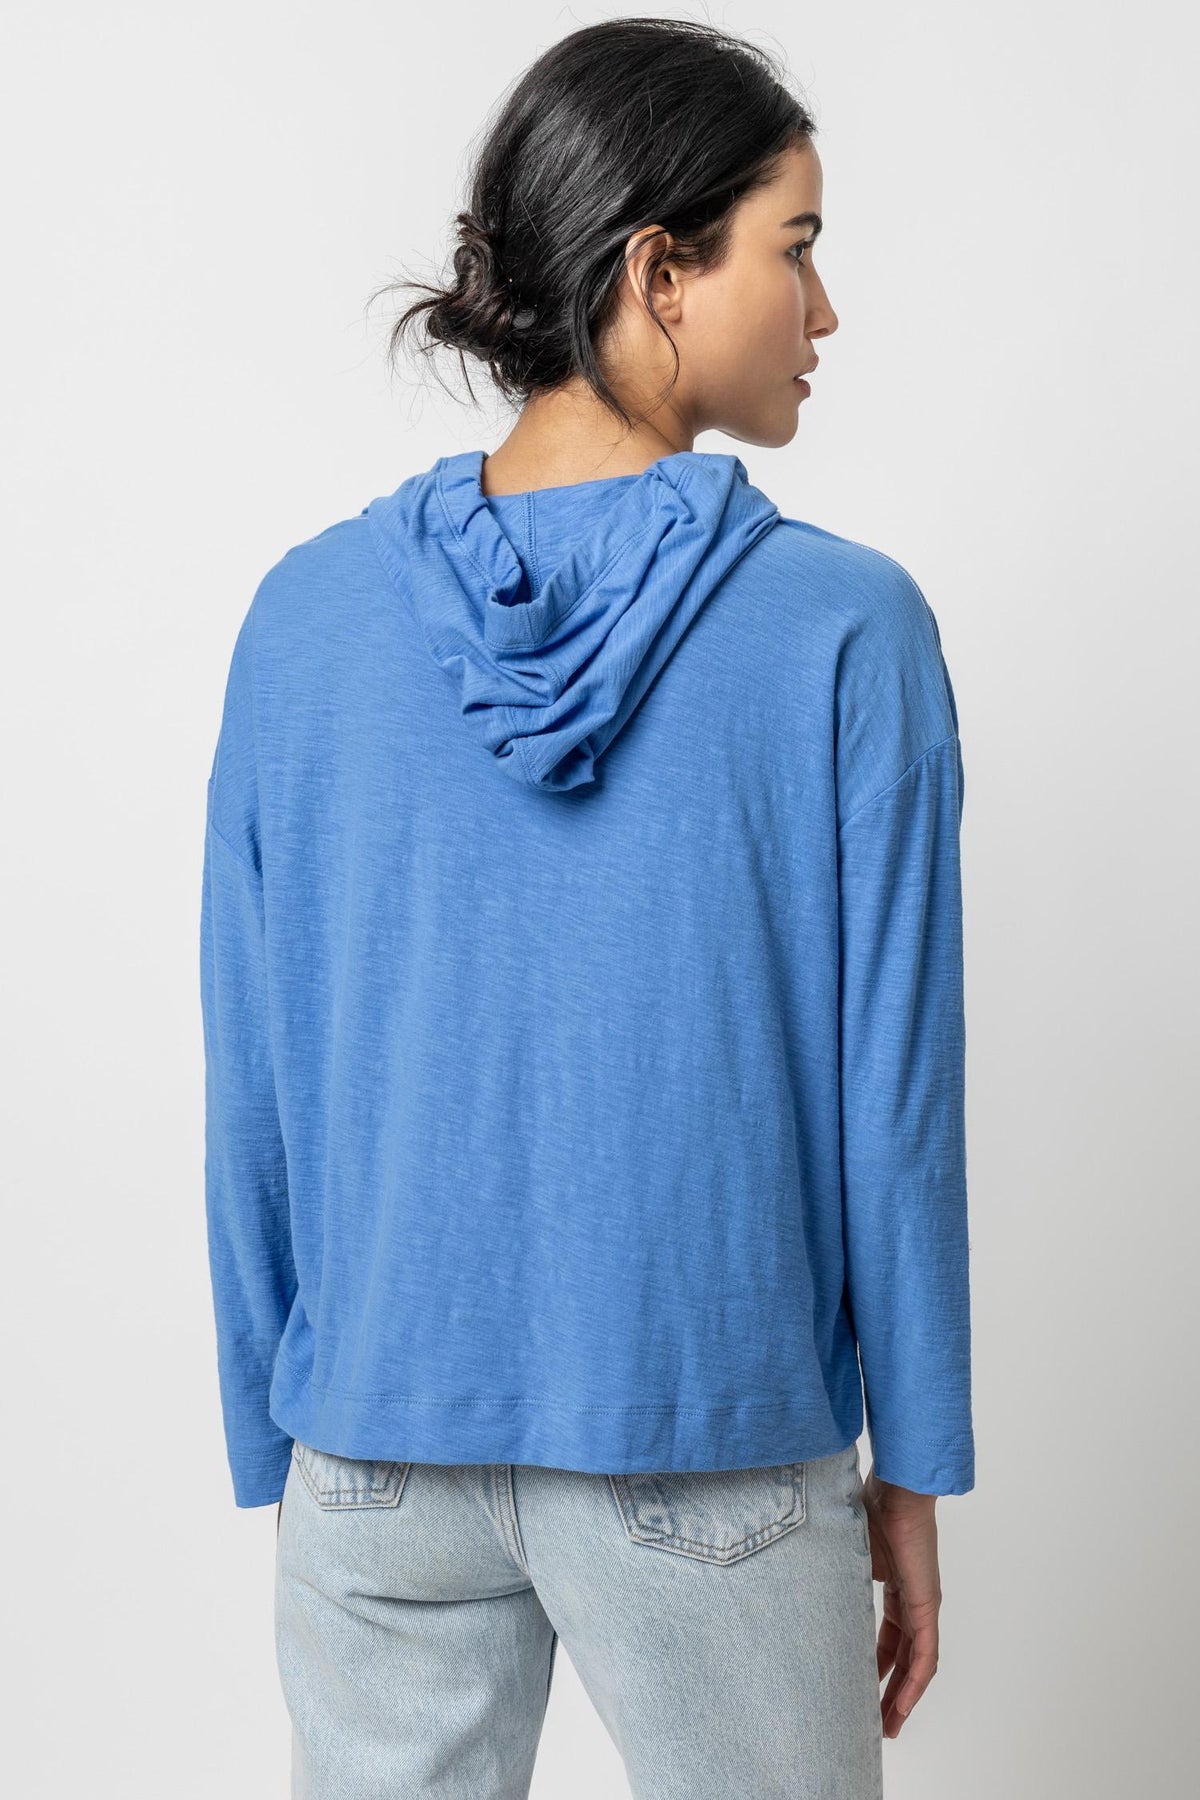 Relaxed Hoodie Tee in Baltic Blue